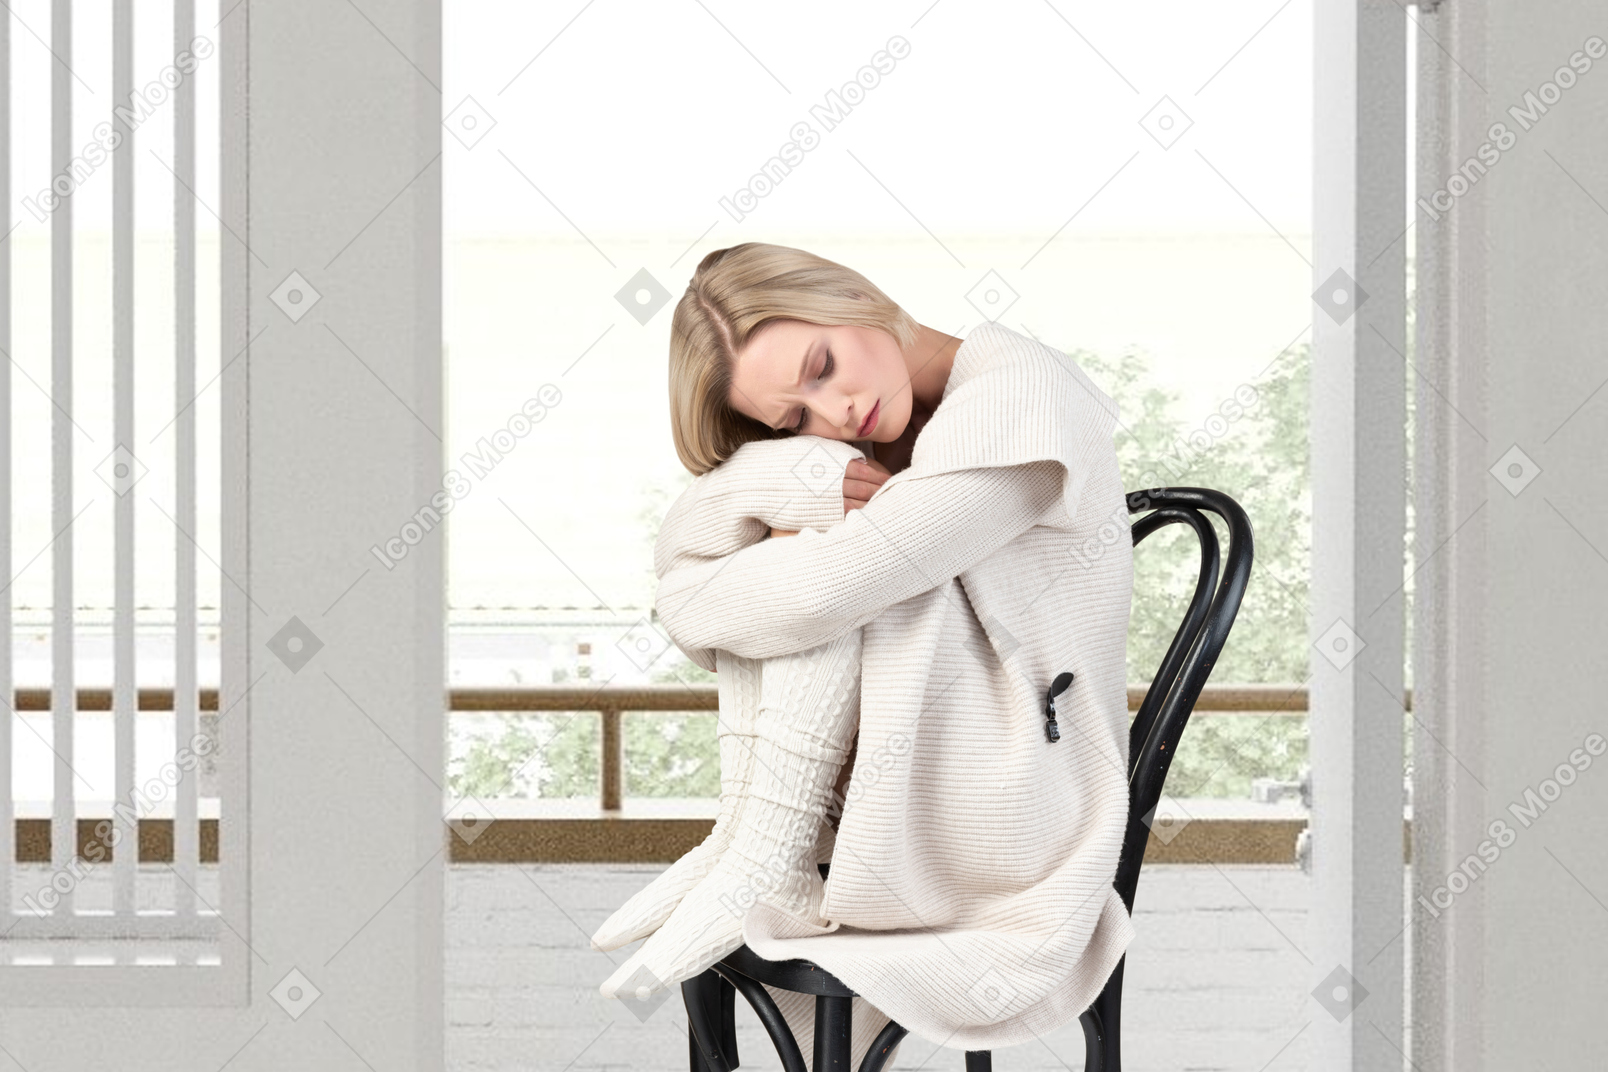 Cozy looking woman sitting on a chair next to a window and hugging her legs